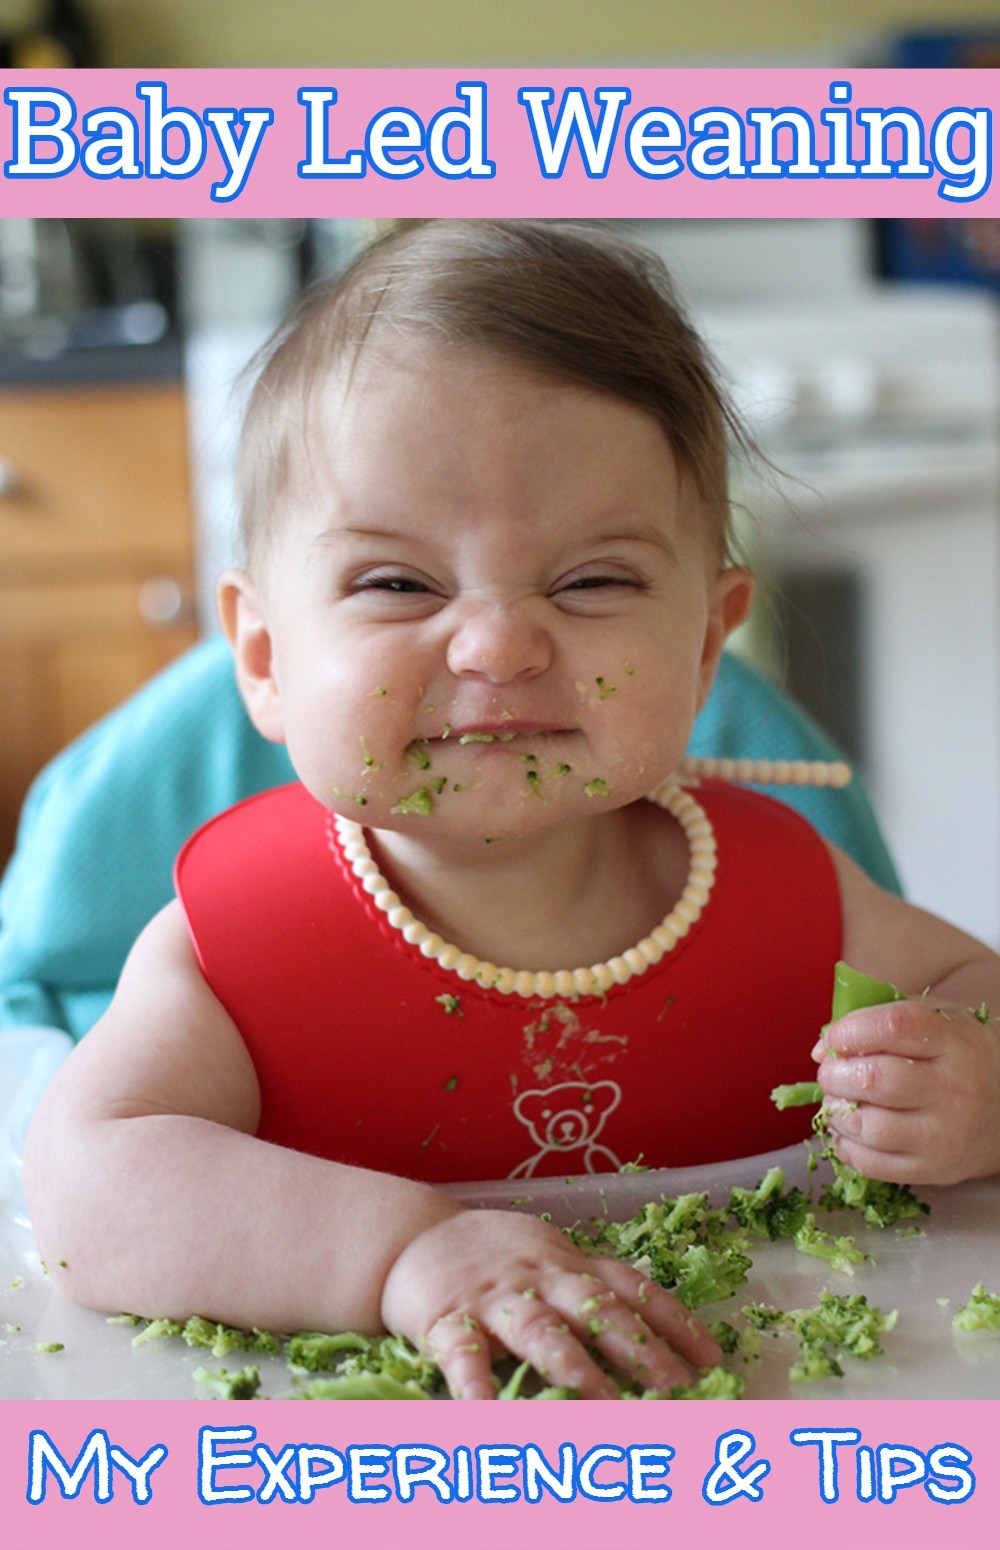 Baby Led Weaning:  My Experience, Tips, First Foods and What Works